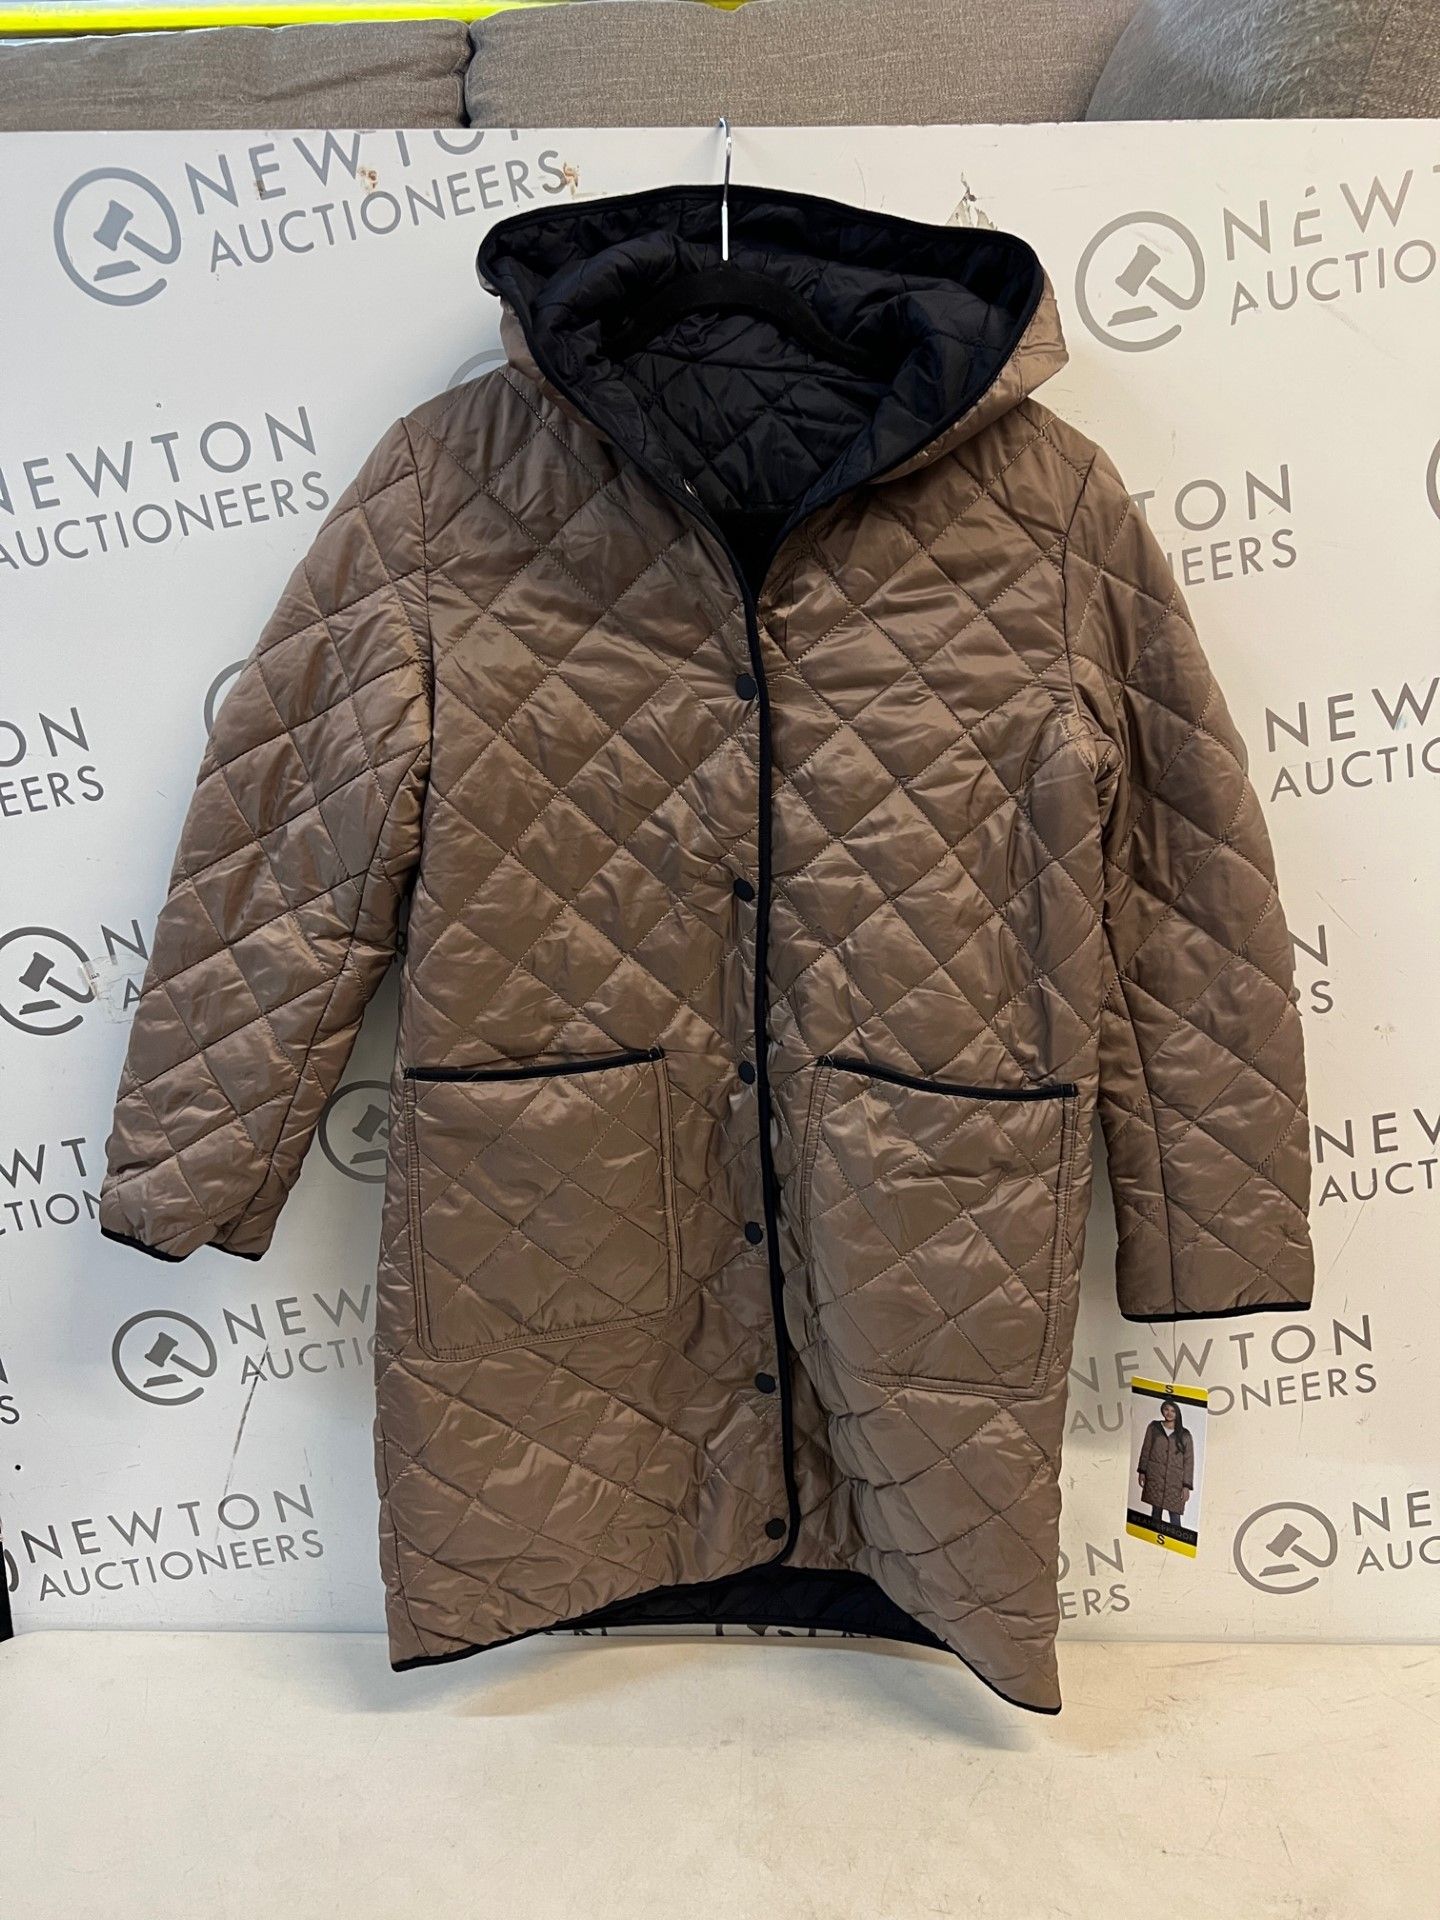 1 BRAND NEW LADIES WEATHERPROOF REVERSIBLE QUILTED LONG JACKET IN TAUPE/NAVY SIZE S RRP Â£59